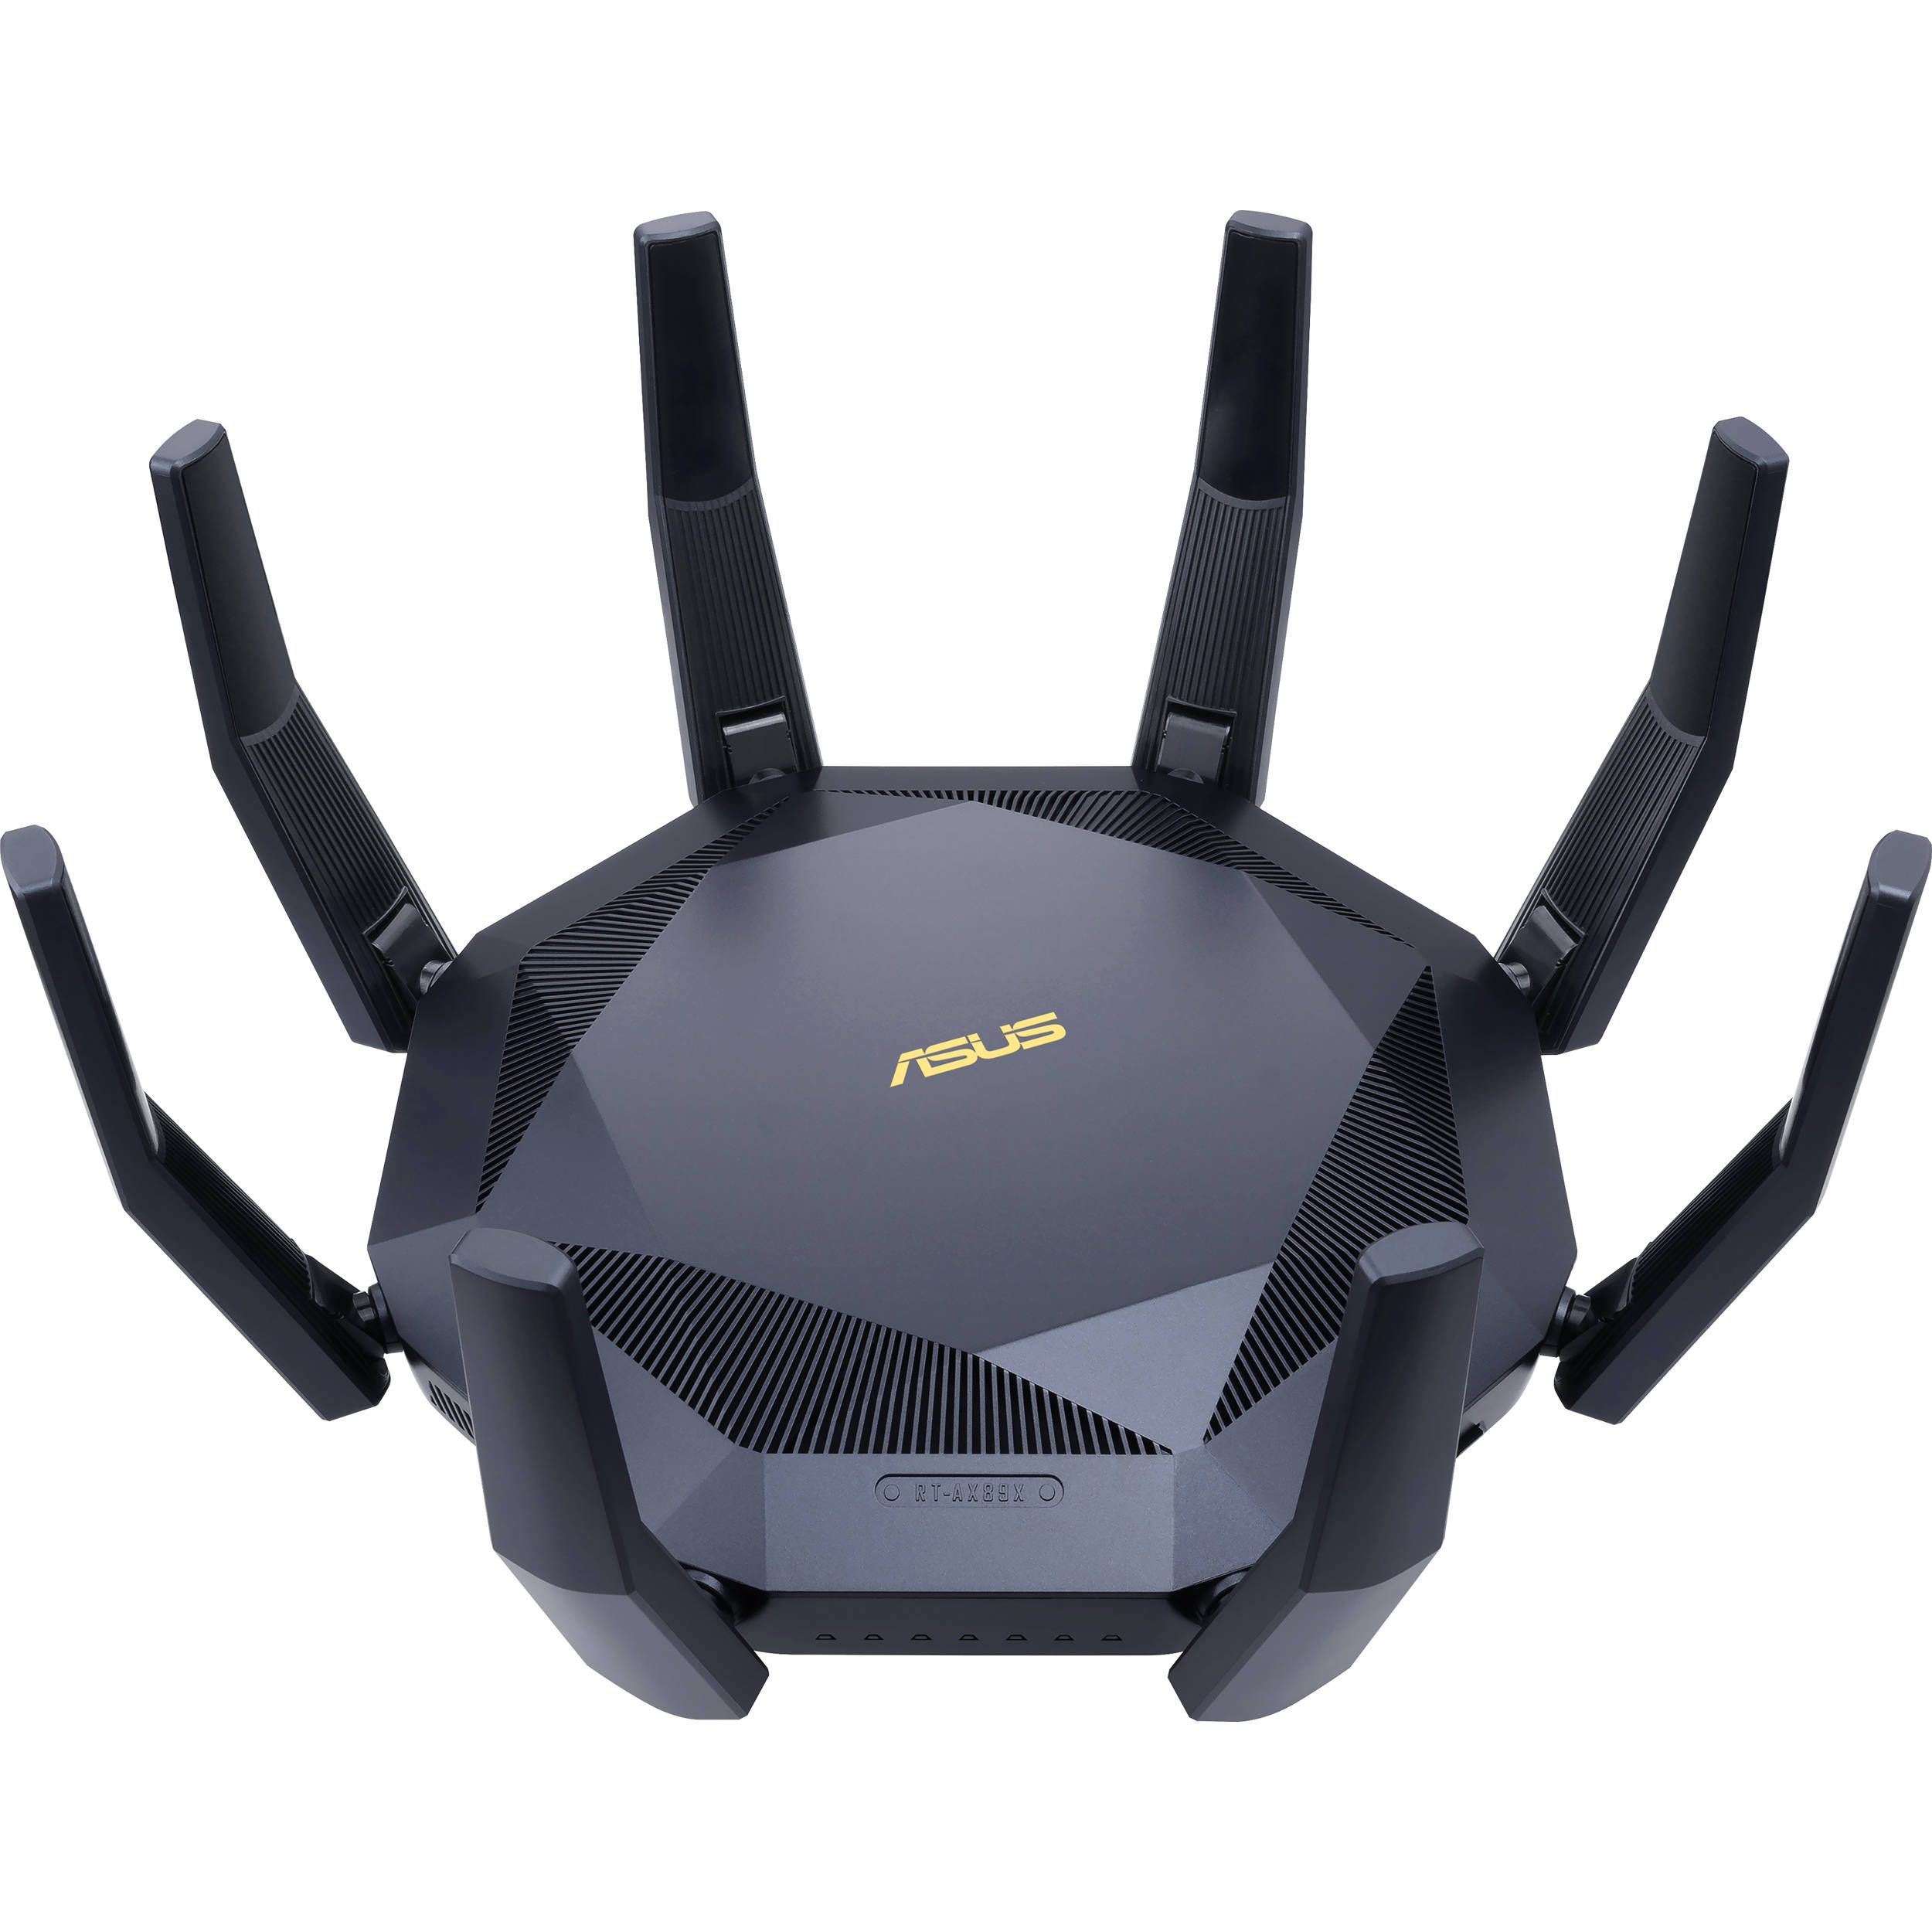 Router Wireless Asus RT-AX89X, 12-stream AX6000 Dual Band WiFi 6, MIMO and OFDMA, Network Standard: IEEE 802.11a, IEEE 802.11b, IEEE 802.11g, WiFi 4 (802.11n), WiFi 5 (802.11ac), WiFi 6 (802.11ax), IPv4, IPv6, External antenna x 8, Transmit/Receive: 2.4 GHz 4 x 4, 5 GHz 8 x 8, 2.2GHz quad-core_1